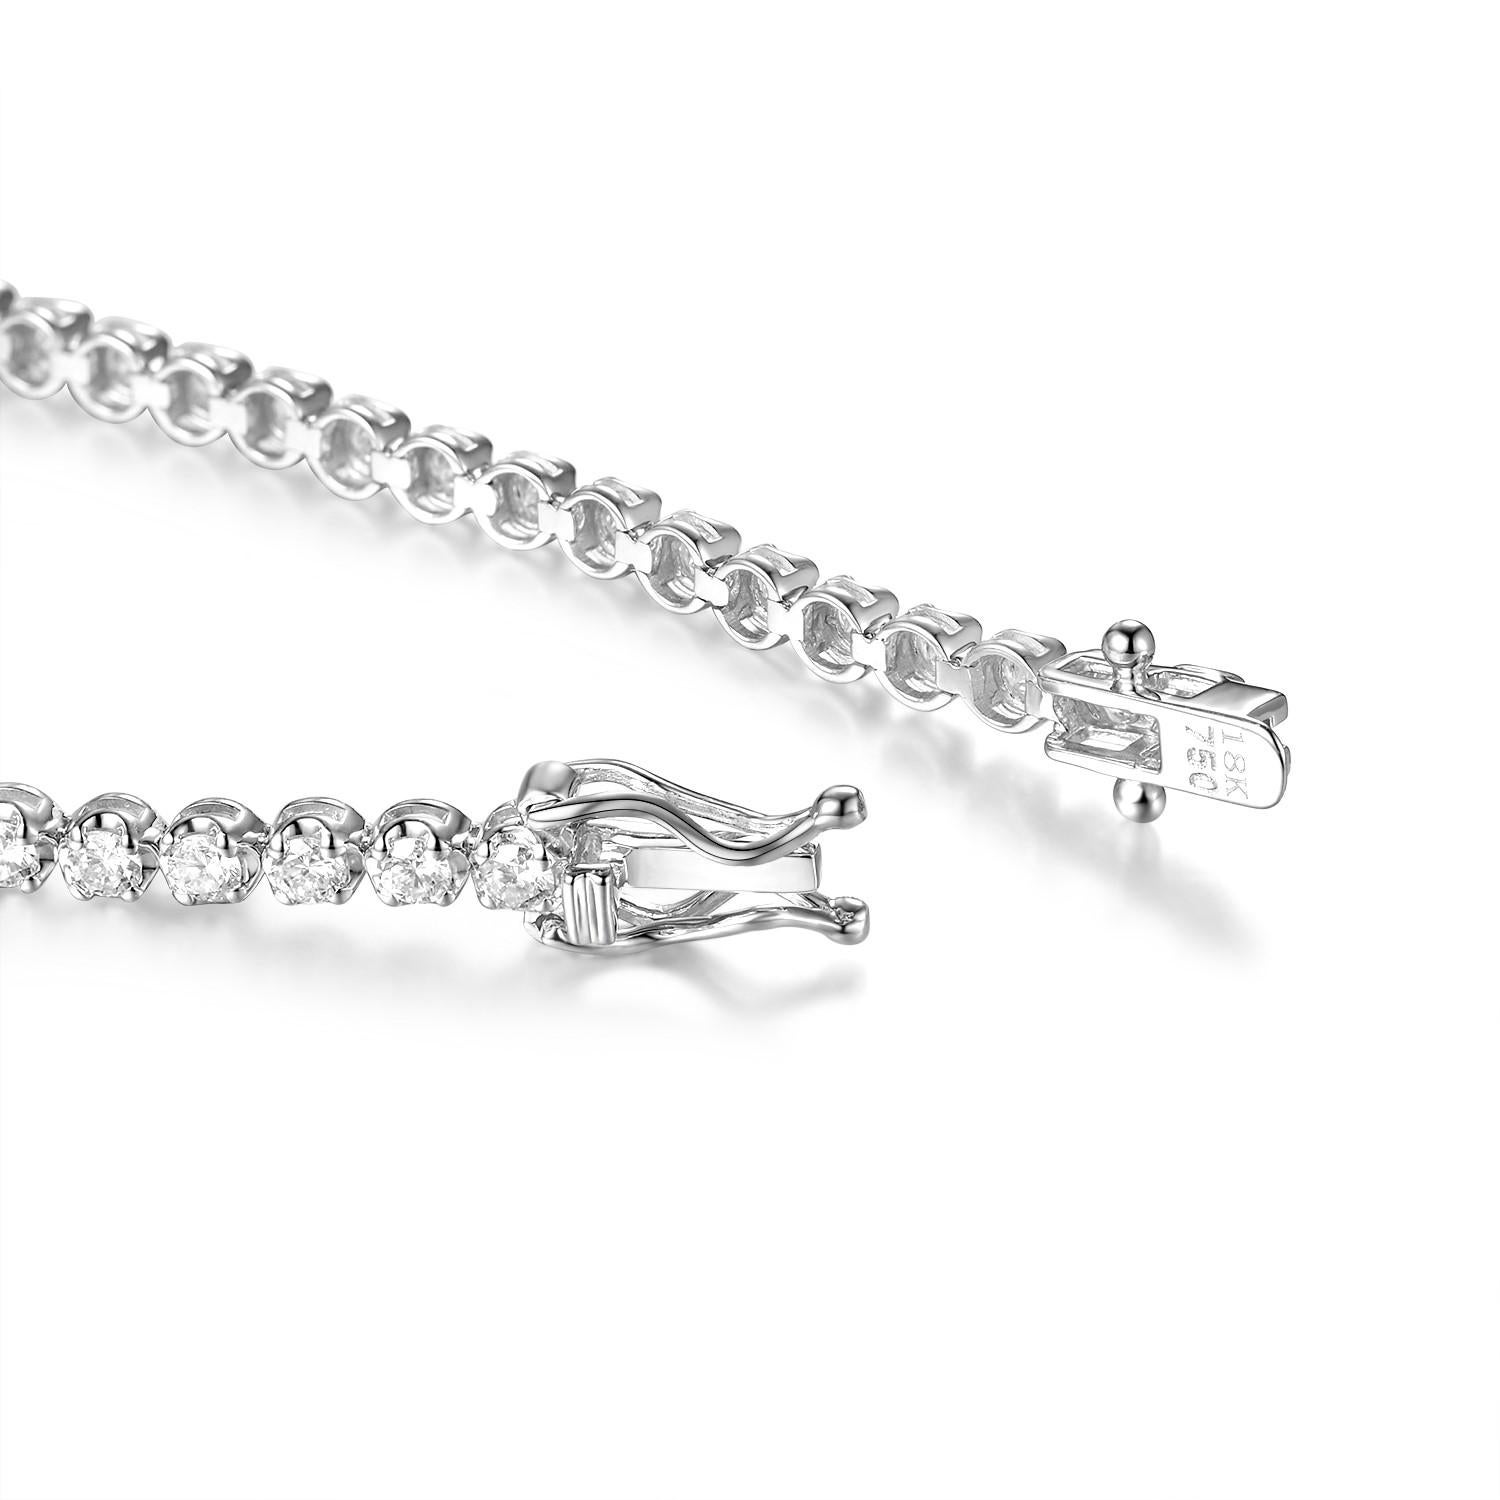 This tennis bracelet feature 2.14 carat of white round diamonds. Each diamond weight 0.035 carat. The diamonds are set in a prong setting in round mounting. Bracelet is set in 18 karat white gold. 

Length 18cm
Complimentary length adjustment